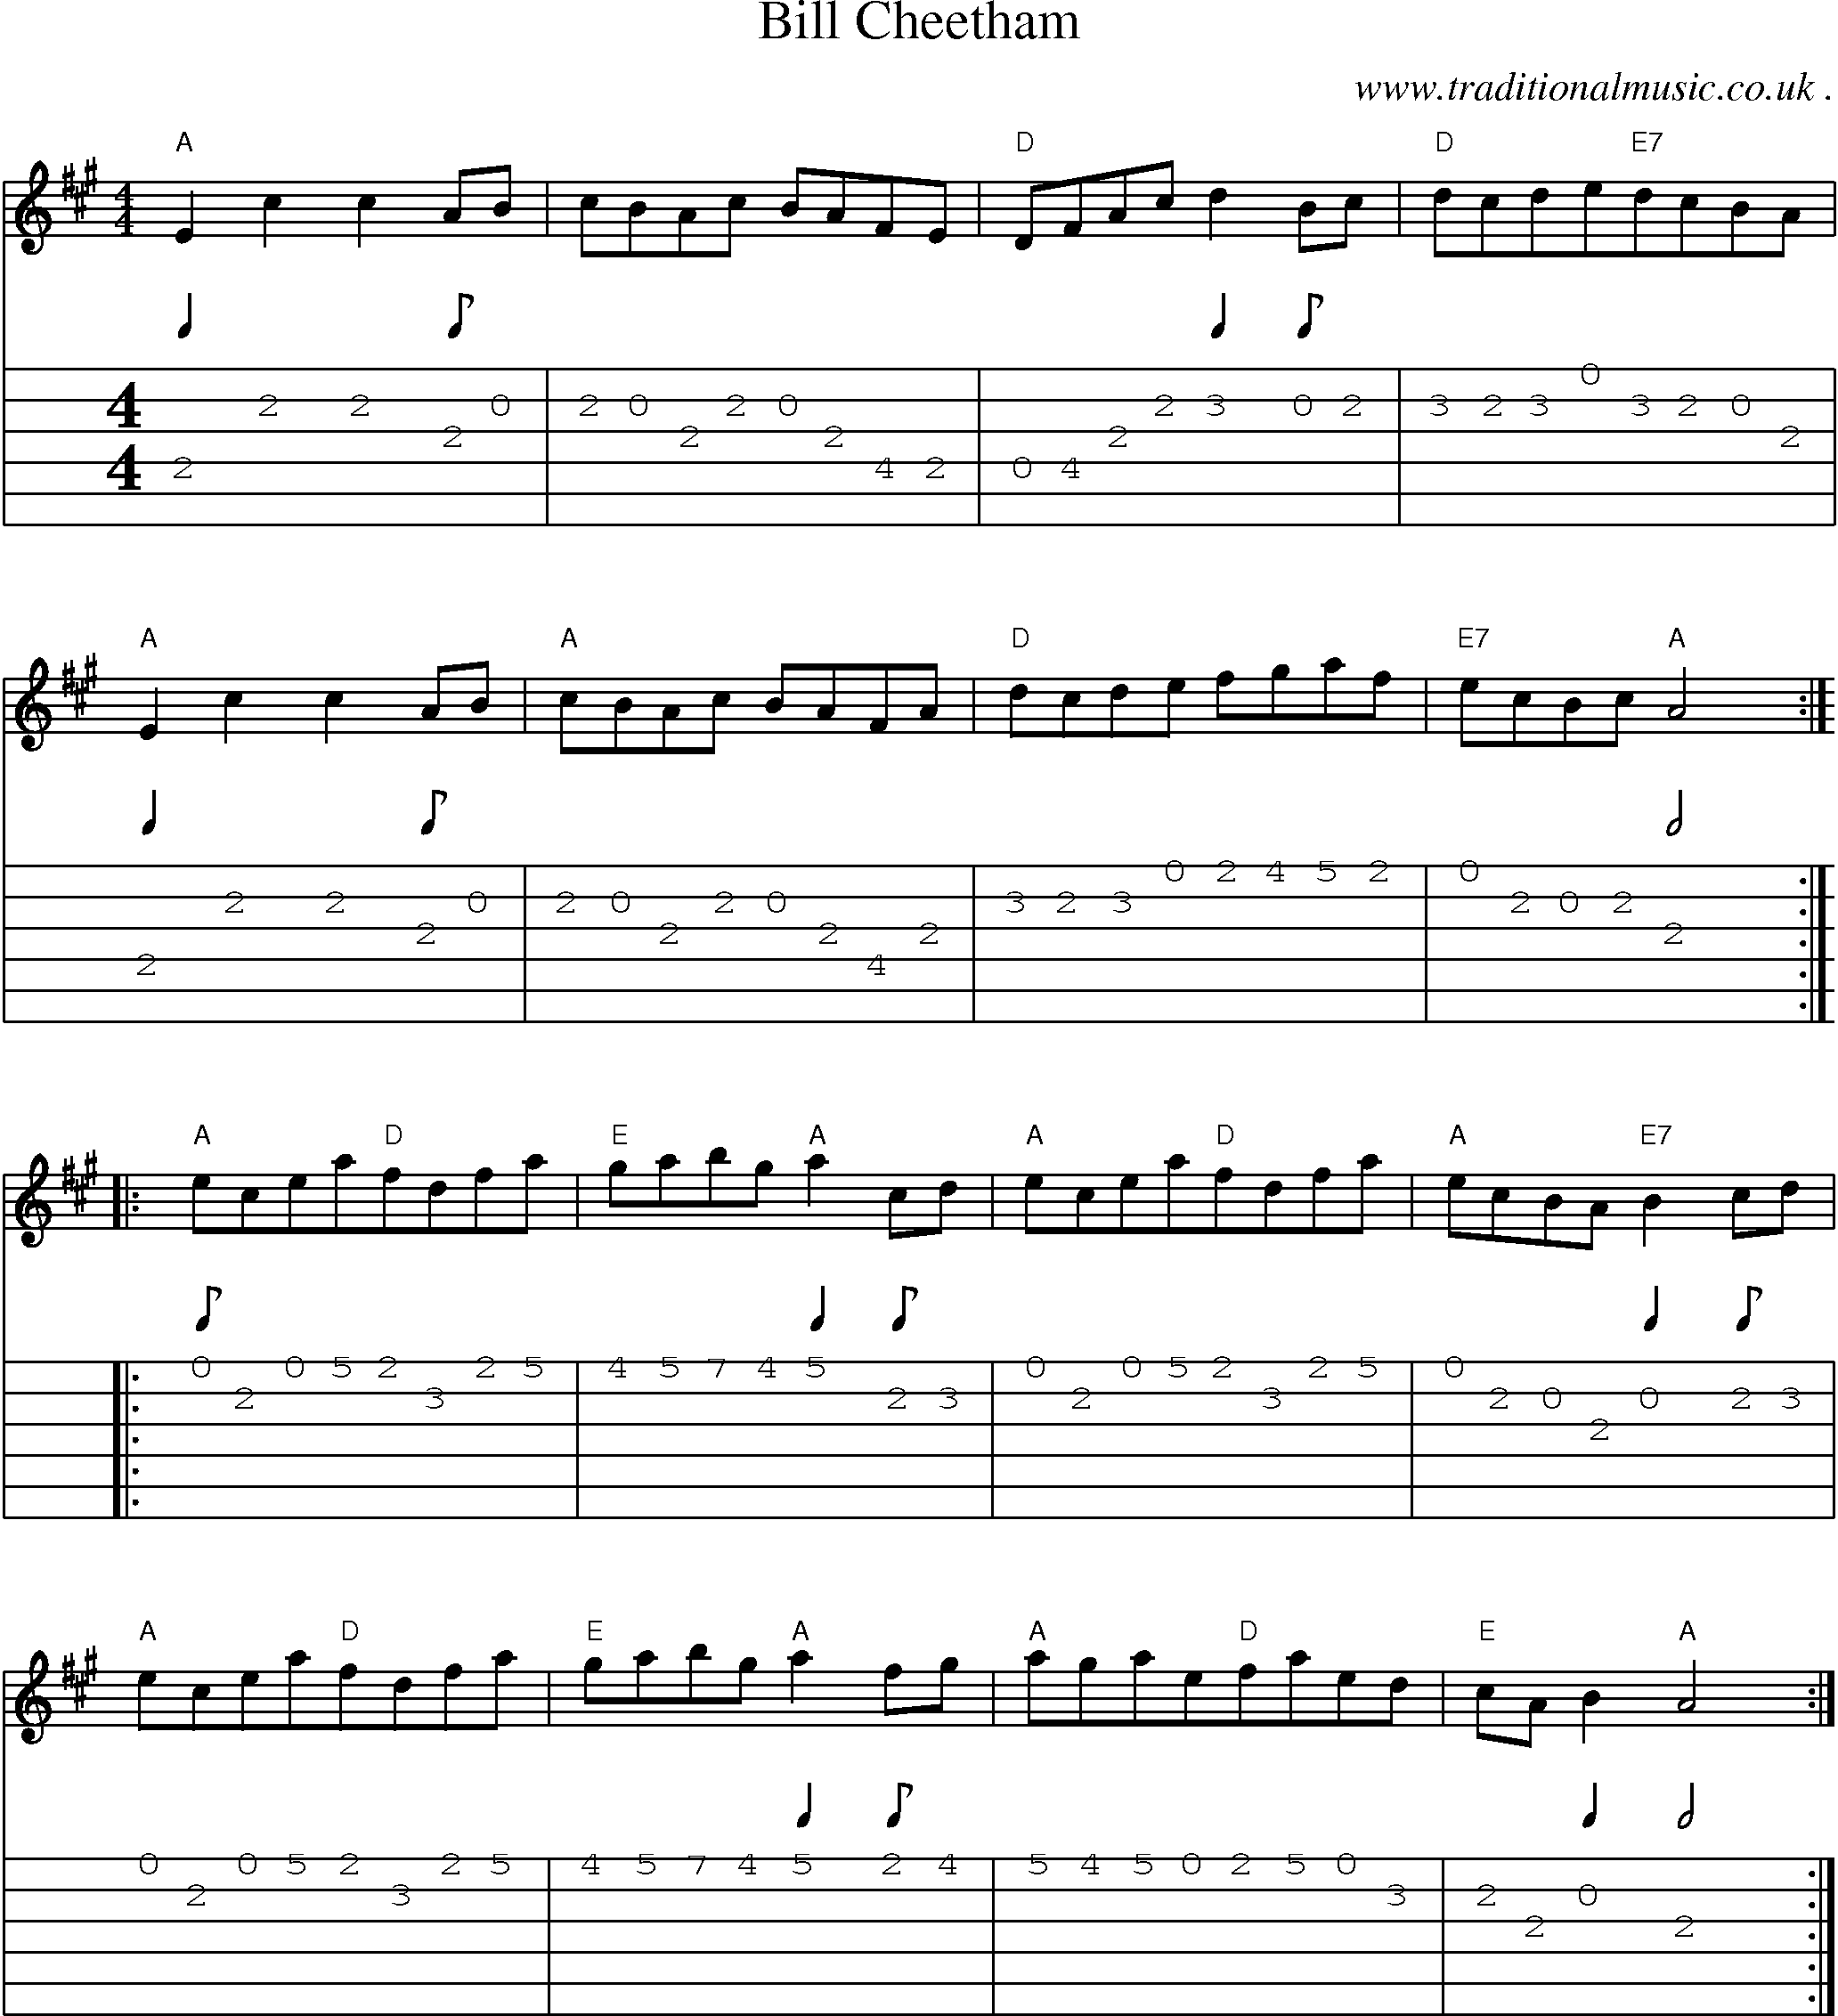 Sheet-Music and Guitar Tabs for Bill Cheetham